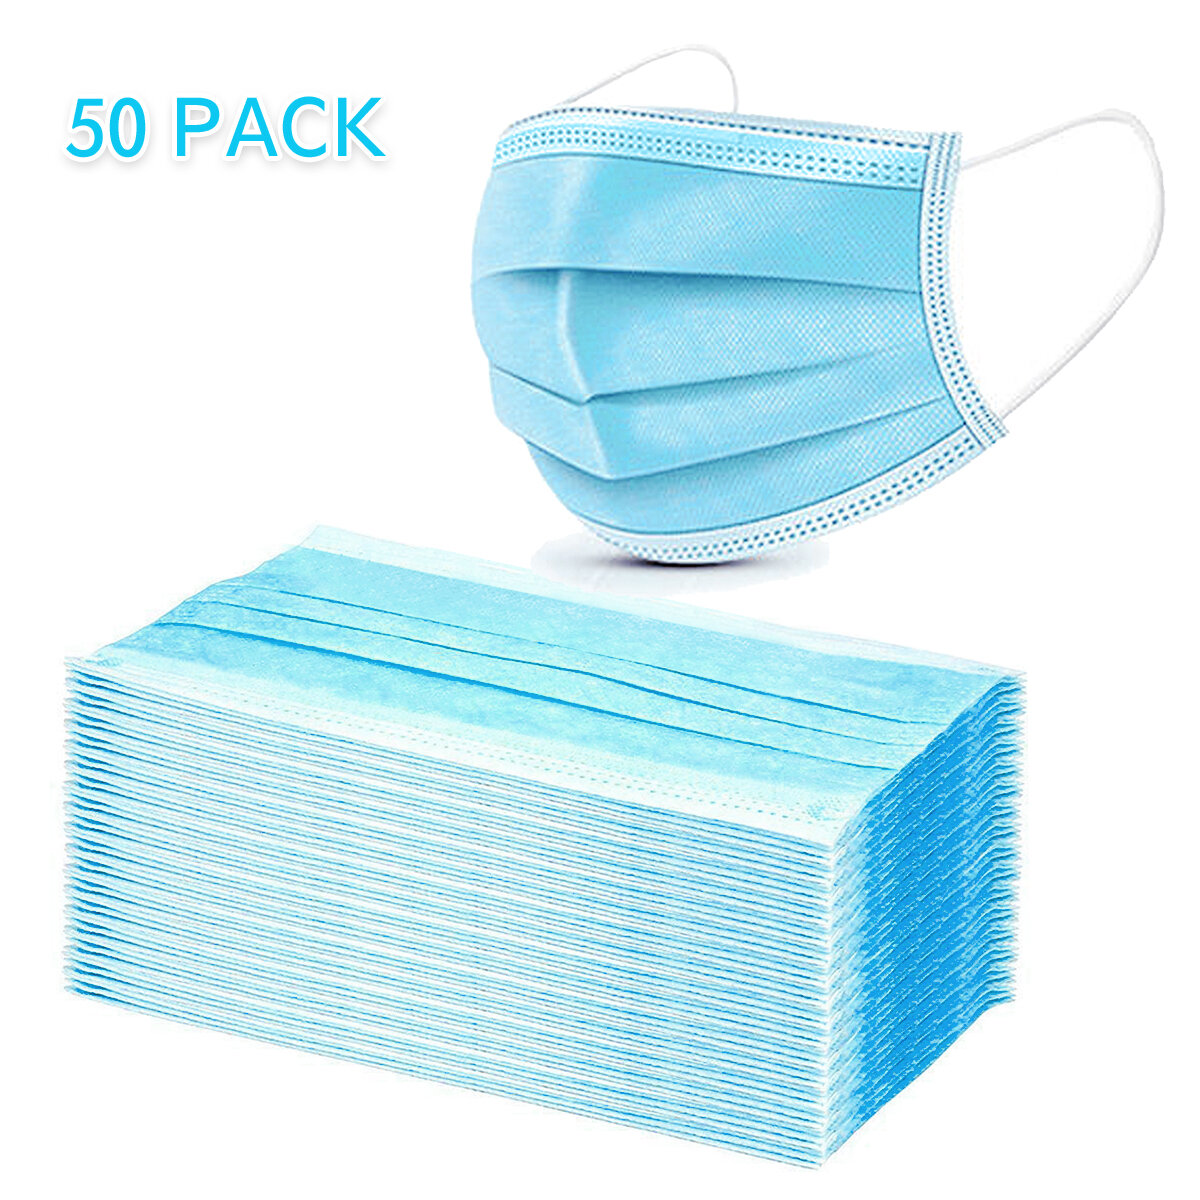 50Pcs Disposable Medical Mouth Face Masks 3-layer Respirator Mask Dust-Proof Personal Protection 